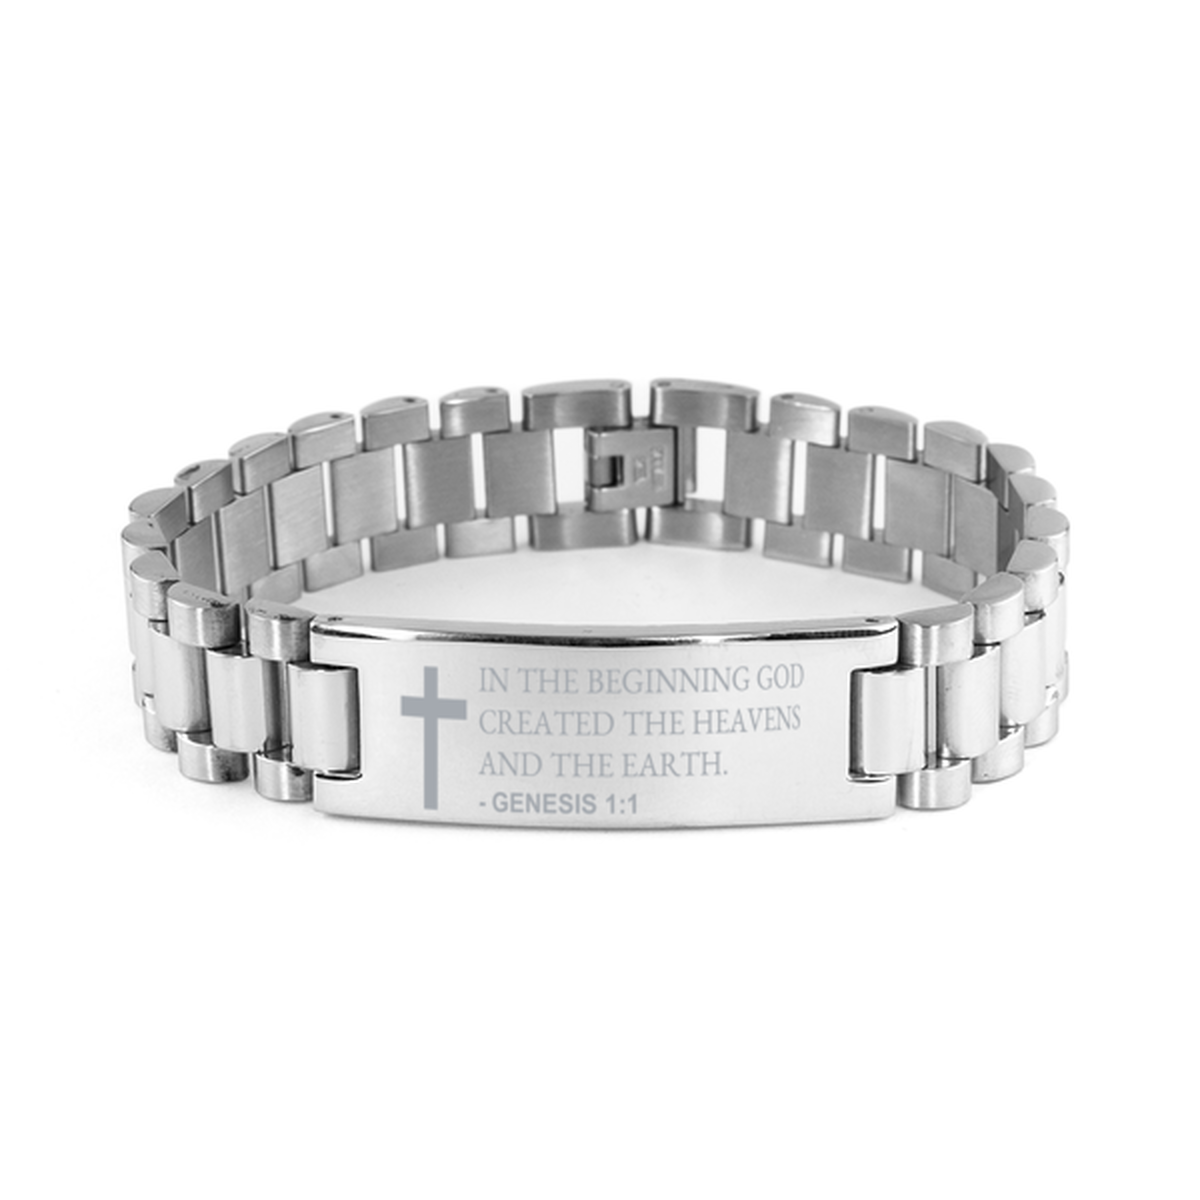 Christian Ladder Stainless Steel Bracelet, Genesis 1:1 In The Beginning God Created The Heavens And The, Motivational Bible Verse Gifts For Men Women